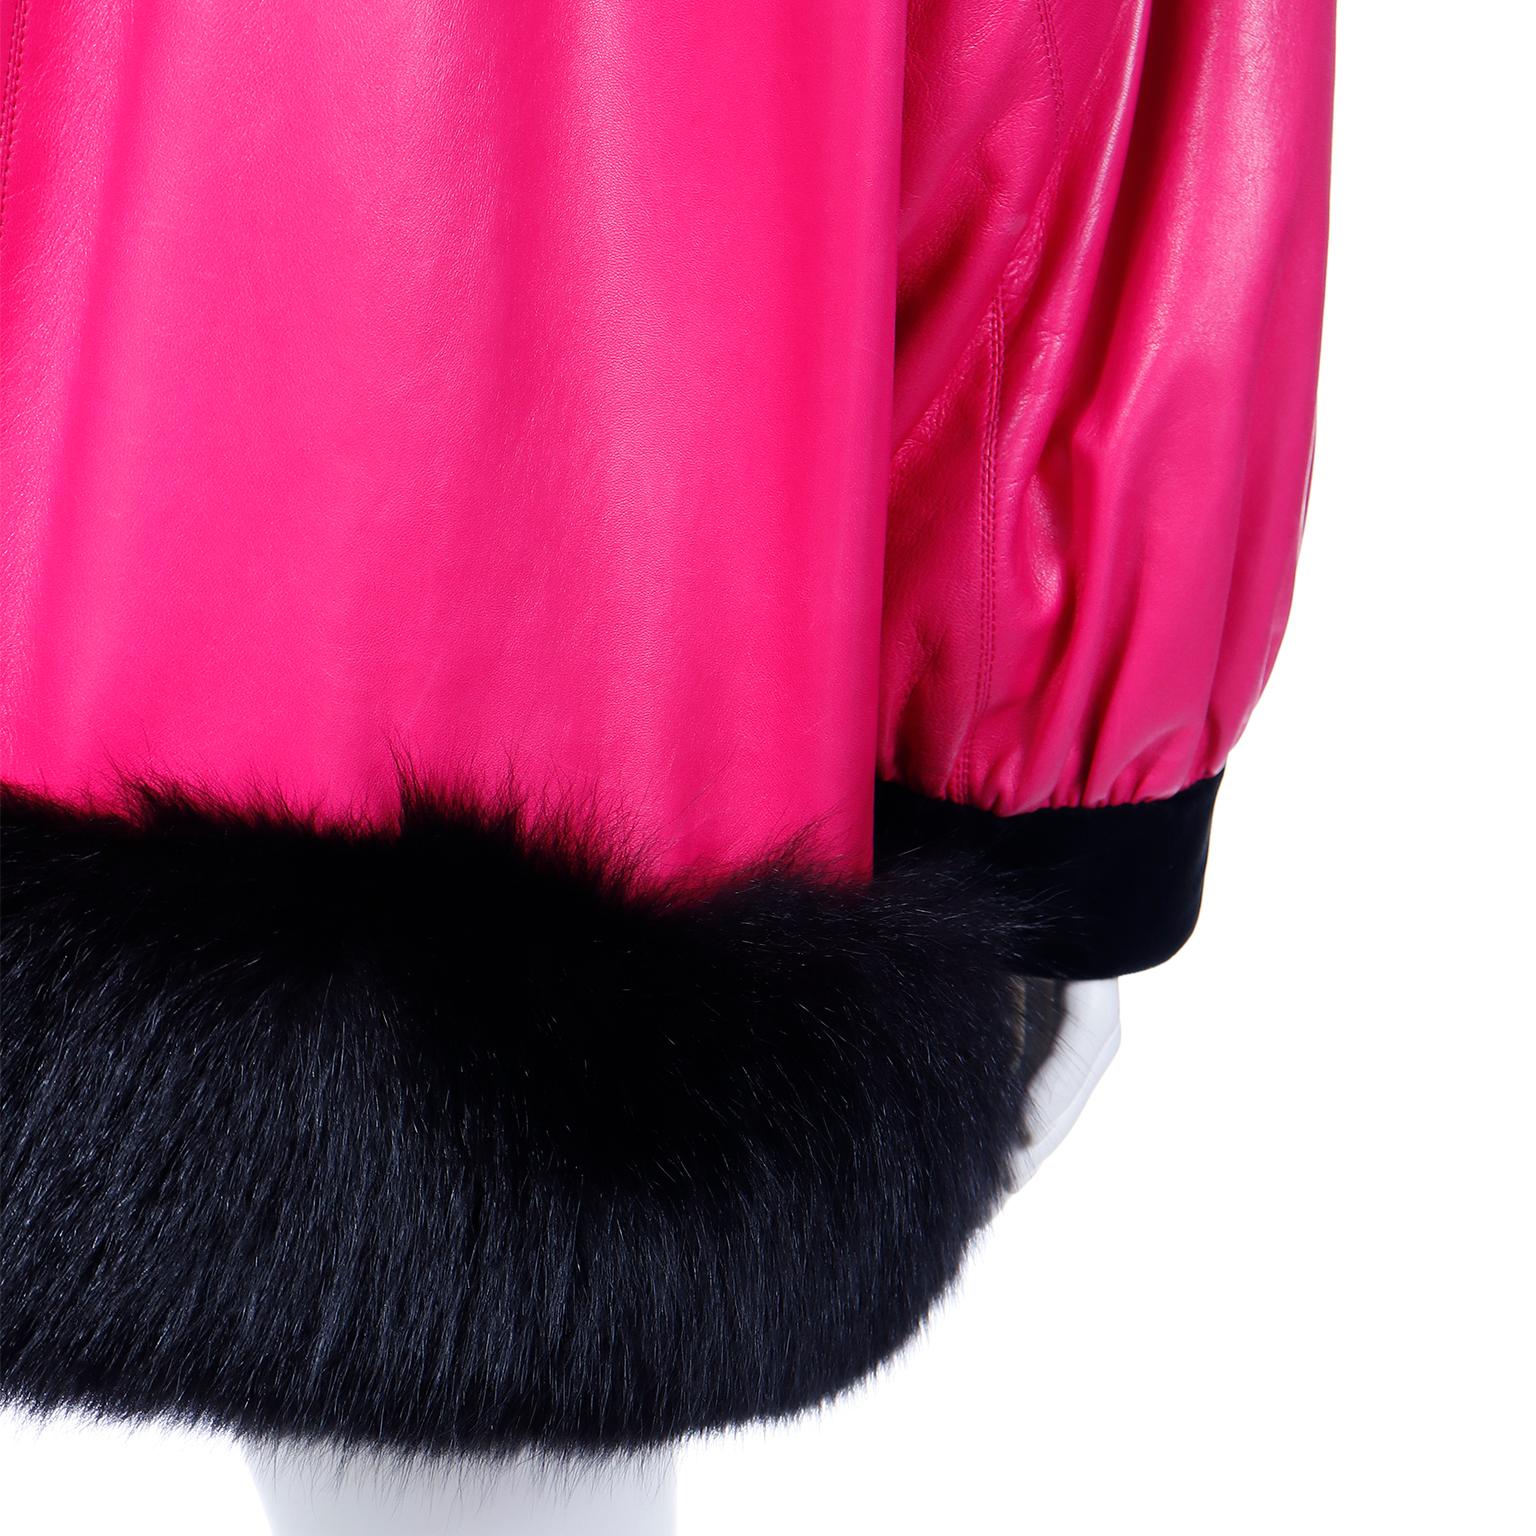 1987 Yves Saint Laurent Runway Haute Couture Pink Leather Jacket w Black Fur For Sale 4